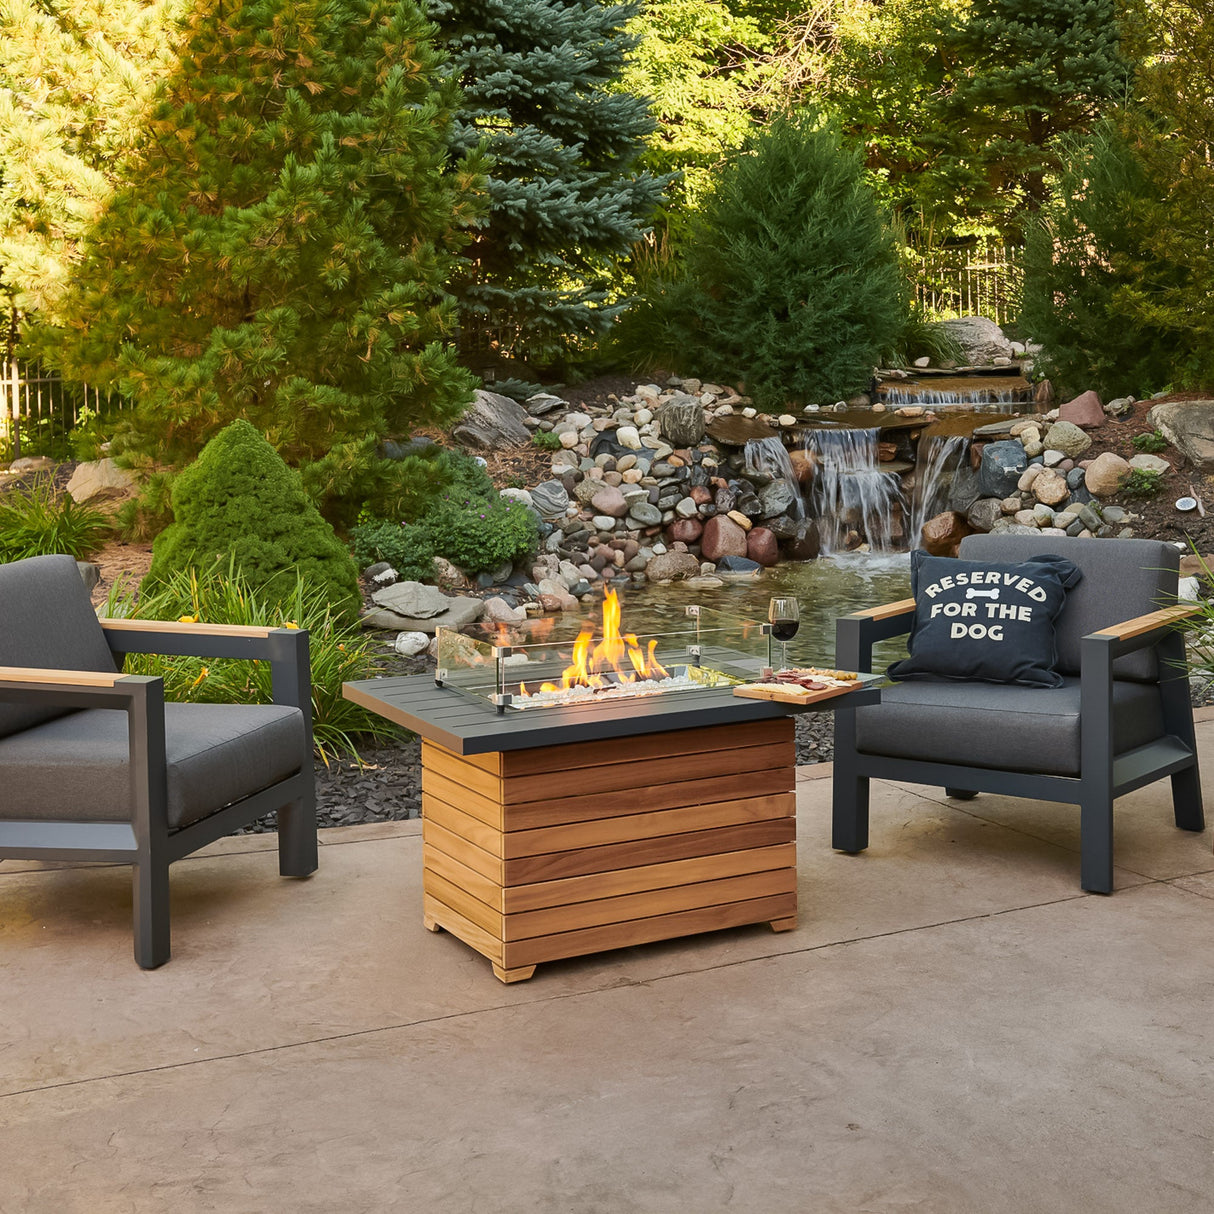 The Darien Rectangular Gas Fire Pit Table being used as a functional table with food and drink on the Aluminum top